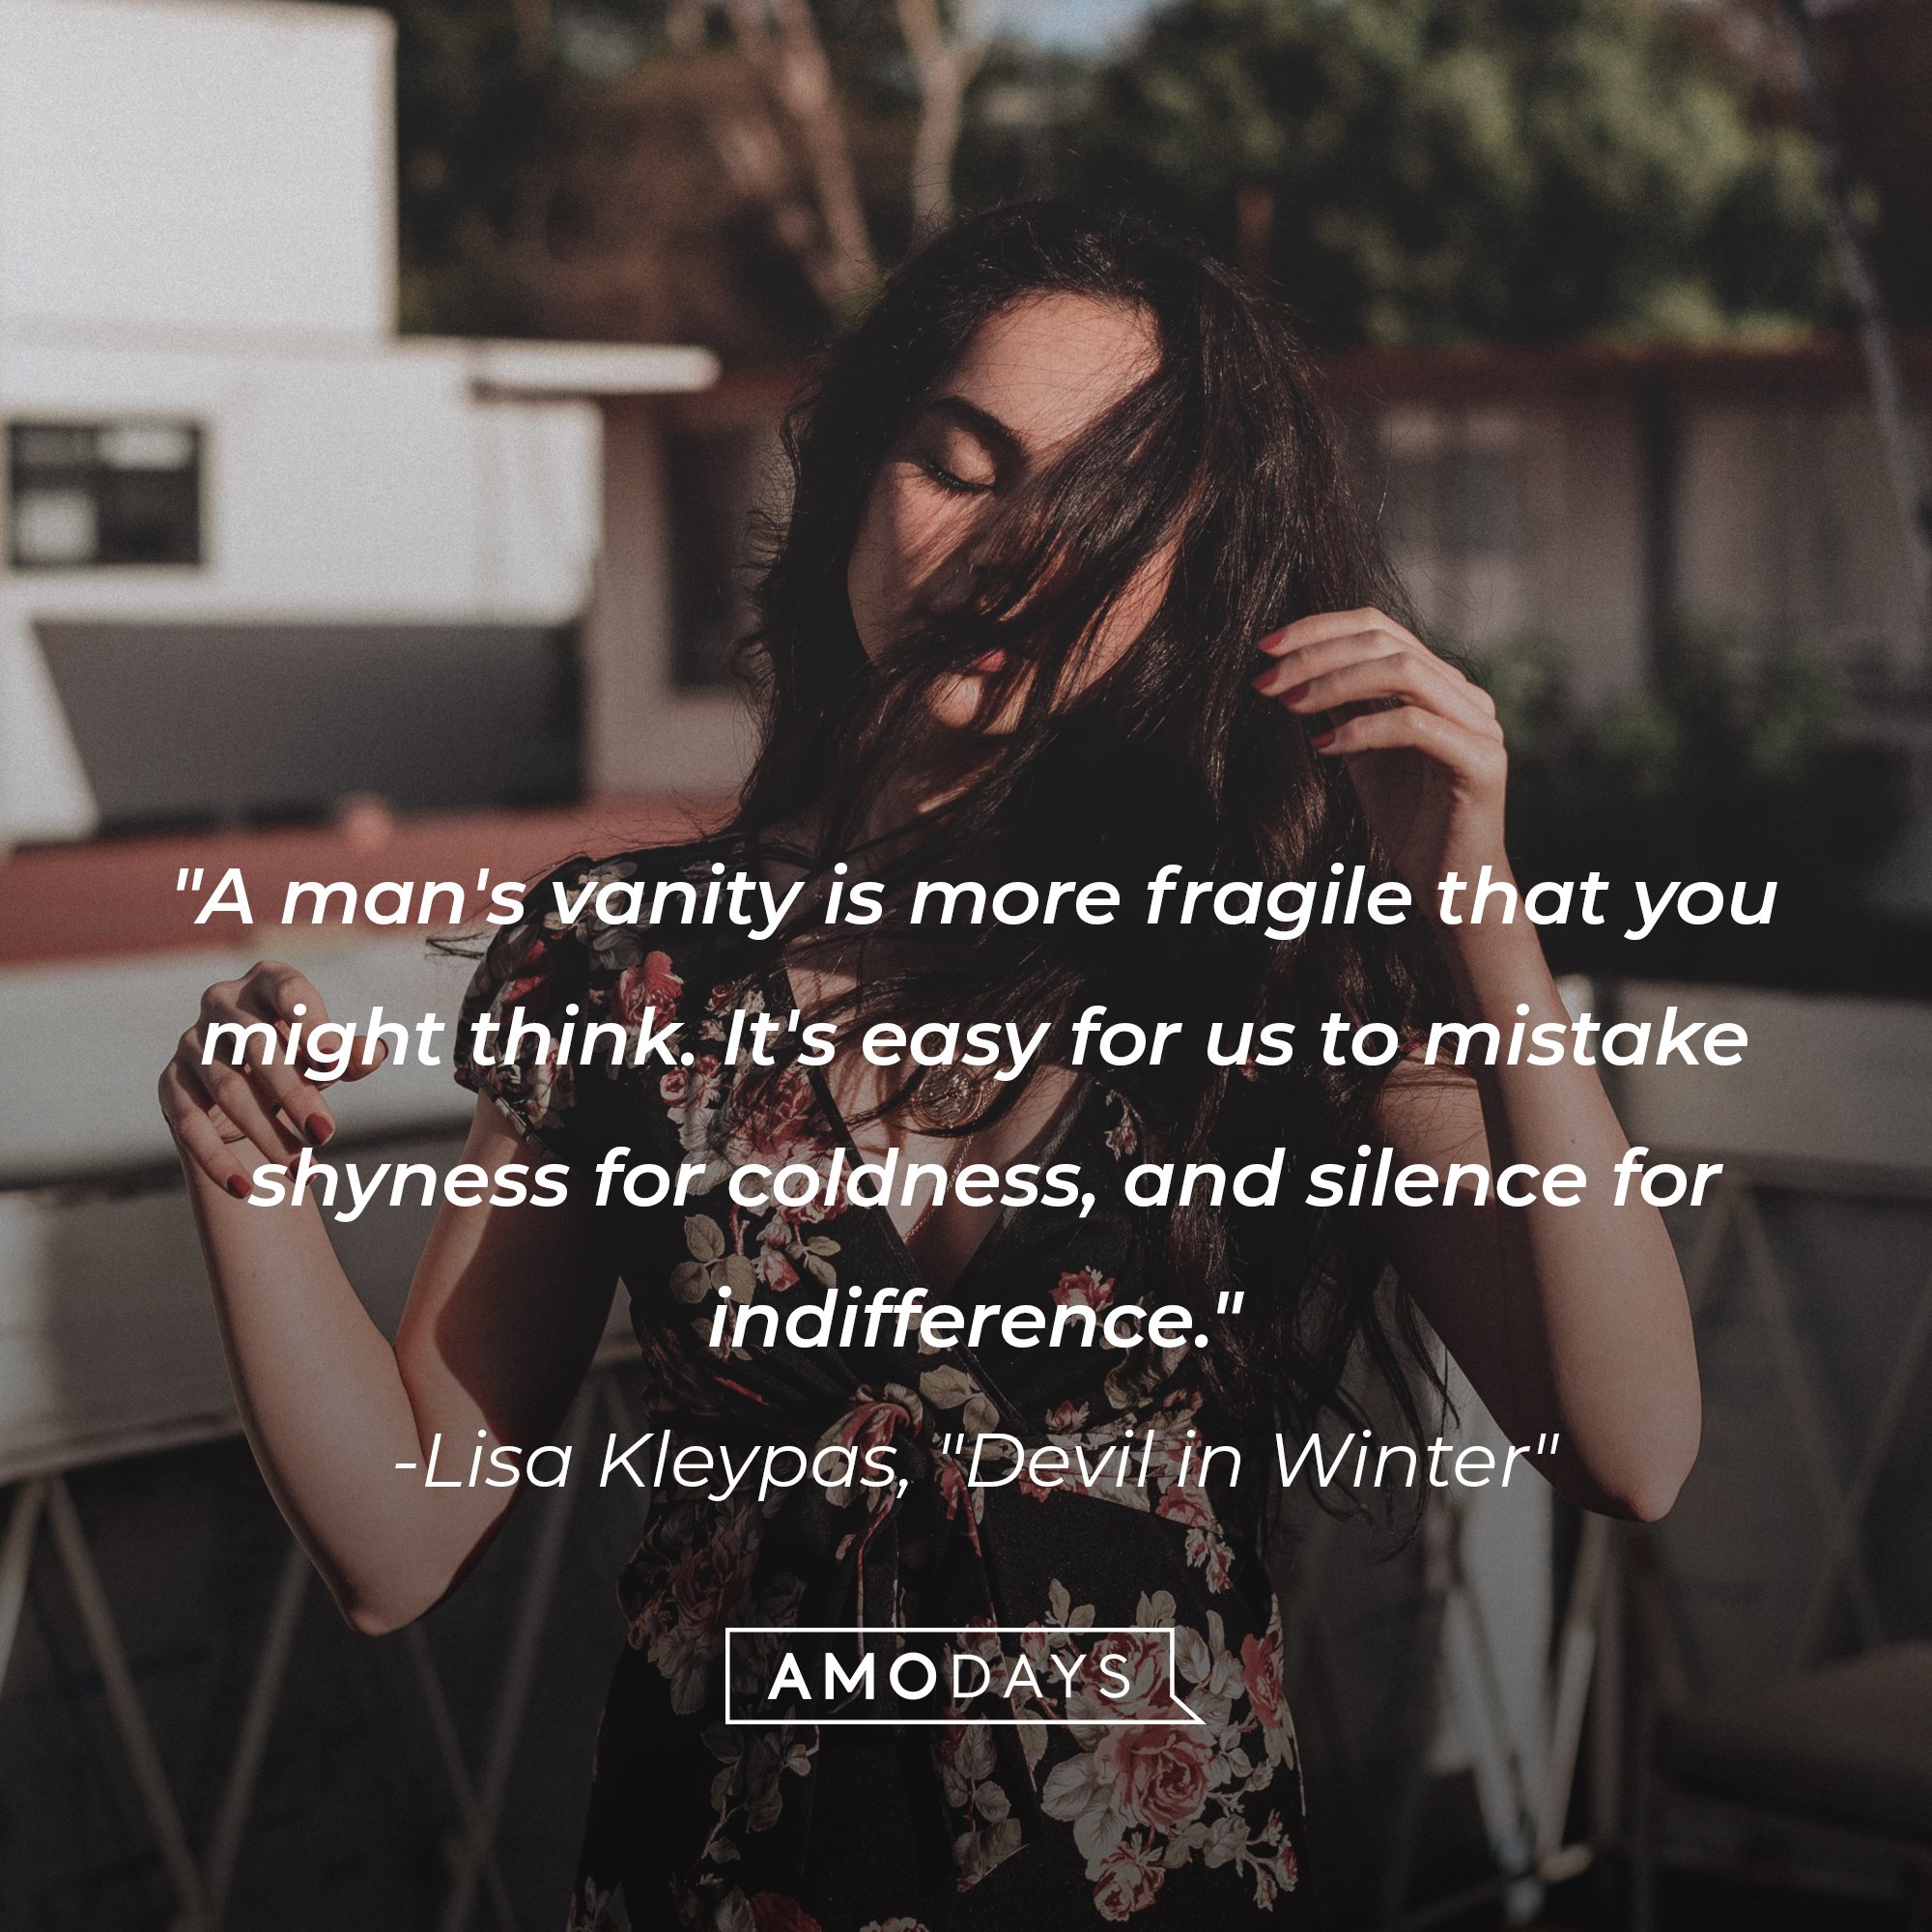 Lisa Kleypas's "Devil in Winter" quote: "A man's vanity is more fragile that you might think. It's easy for us to mistake shyness for coldness, and silence for indifference." | Image: AmoDays